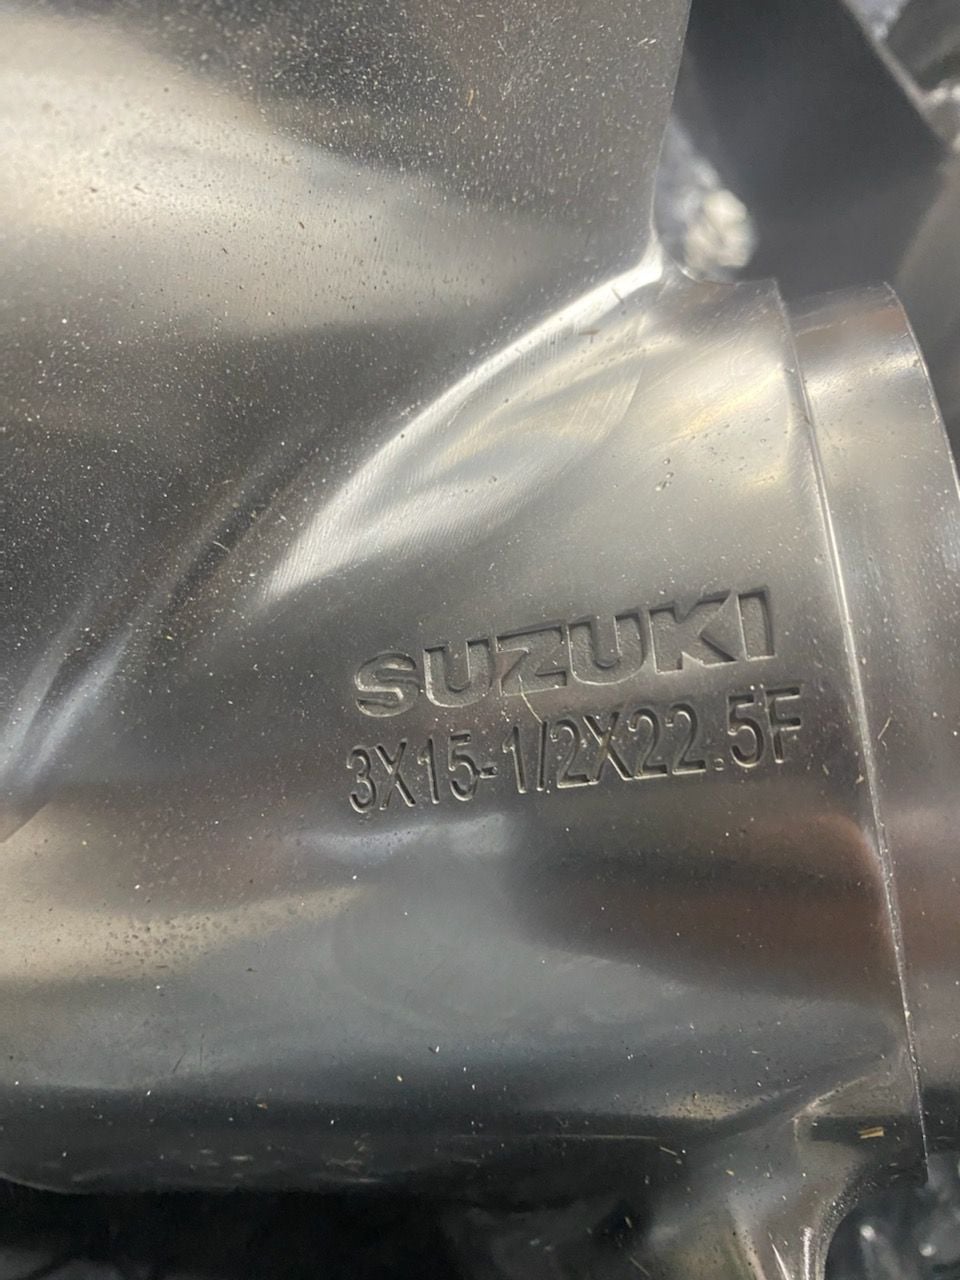 Suzuki props DF 350 The Hull Truth Boating and Fishing Forum